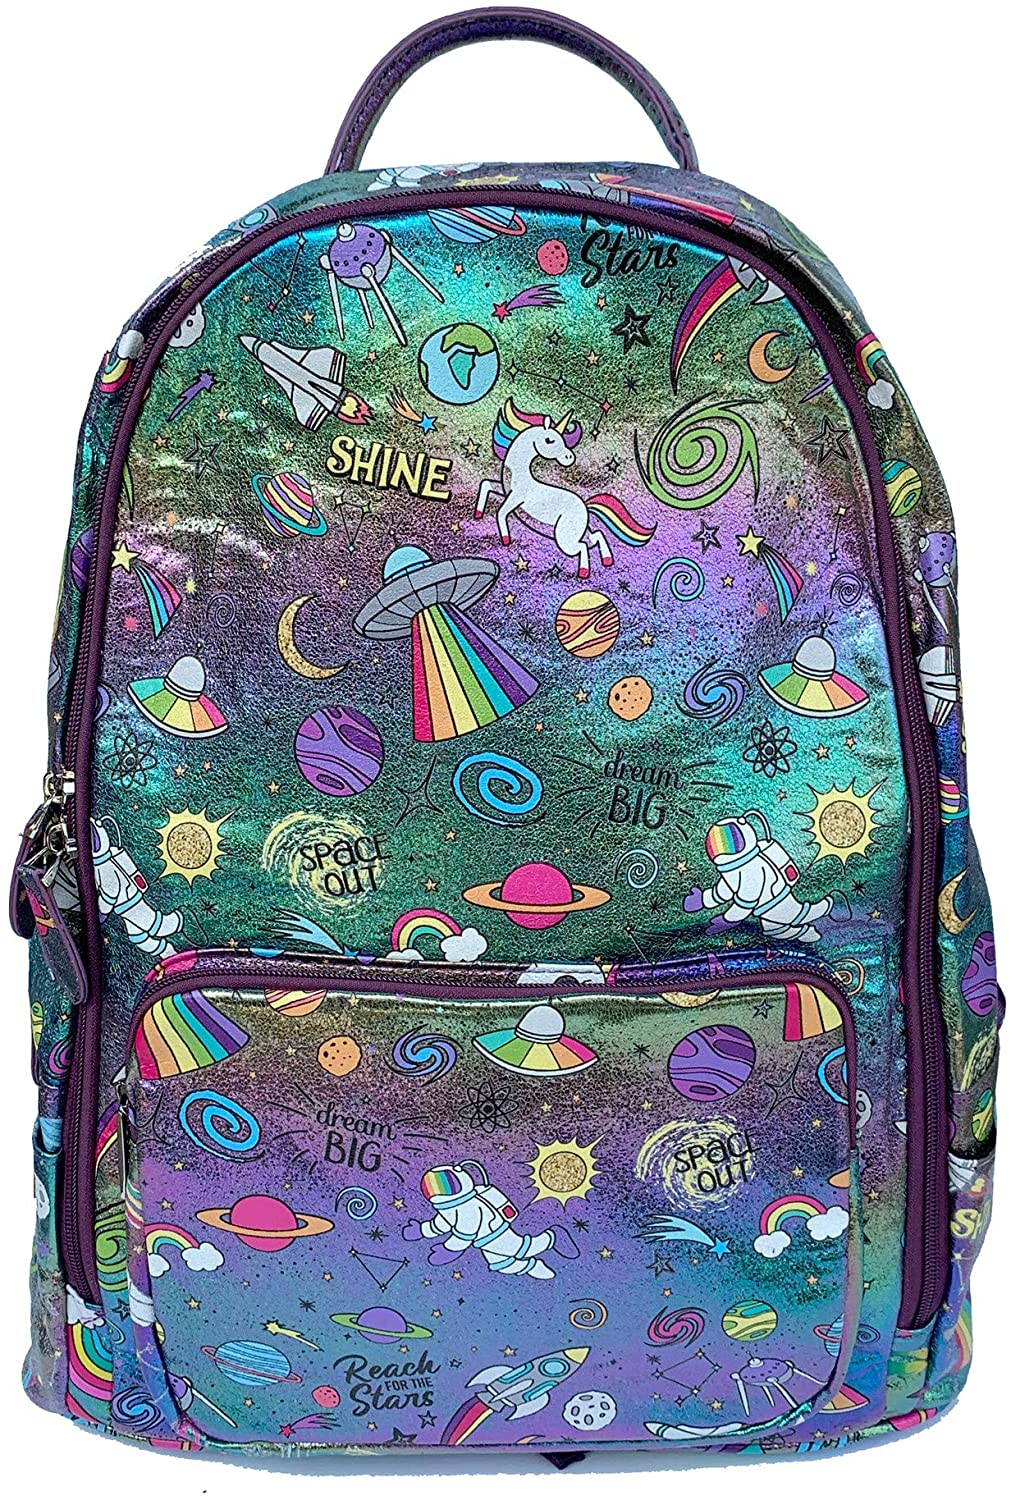 Just Because School Is Online Doesn’t Mean You Can’t Shop the Perfect Backpack